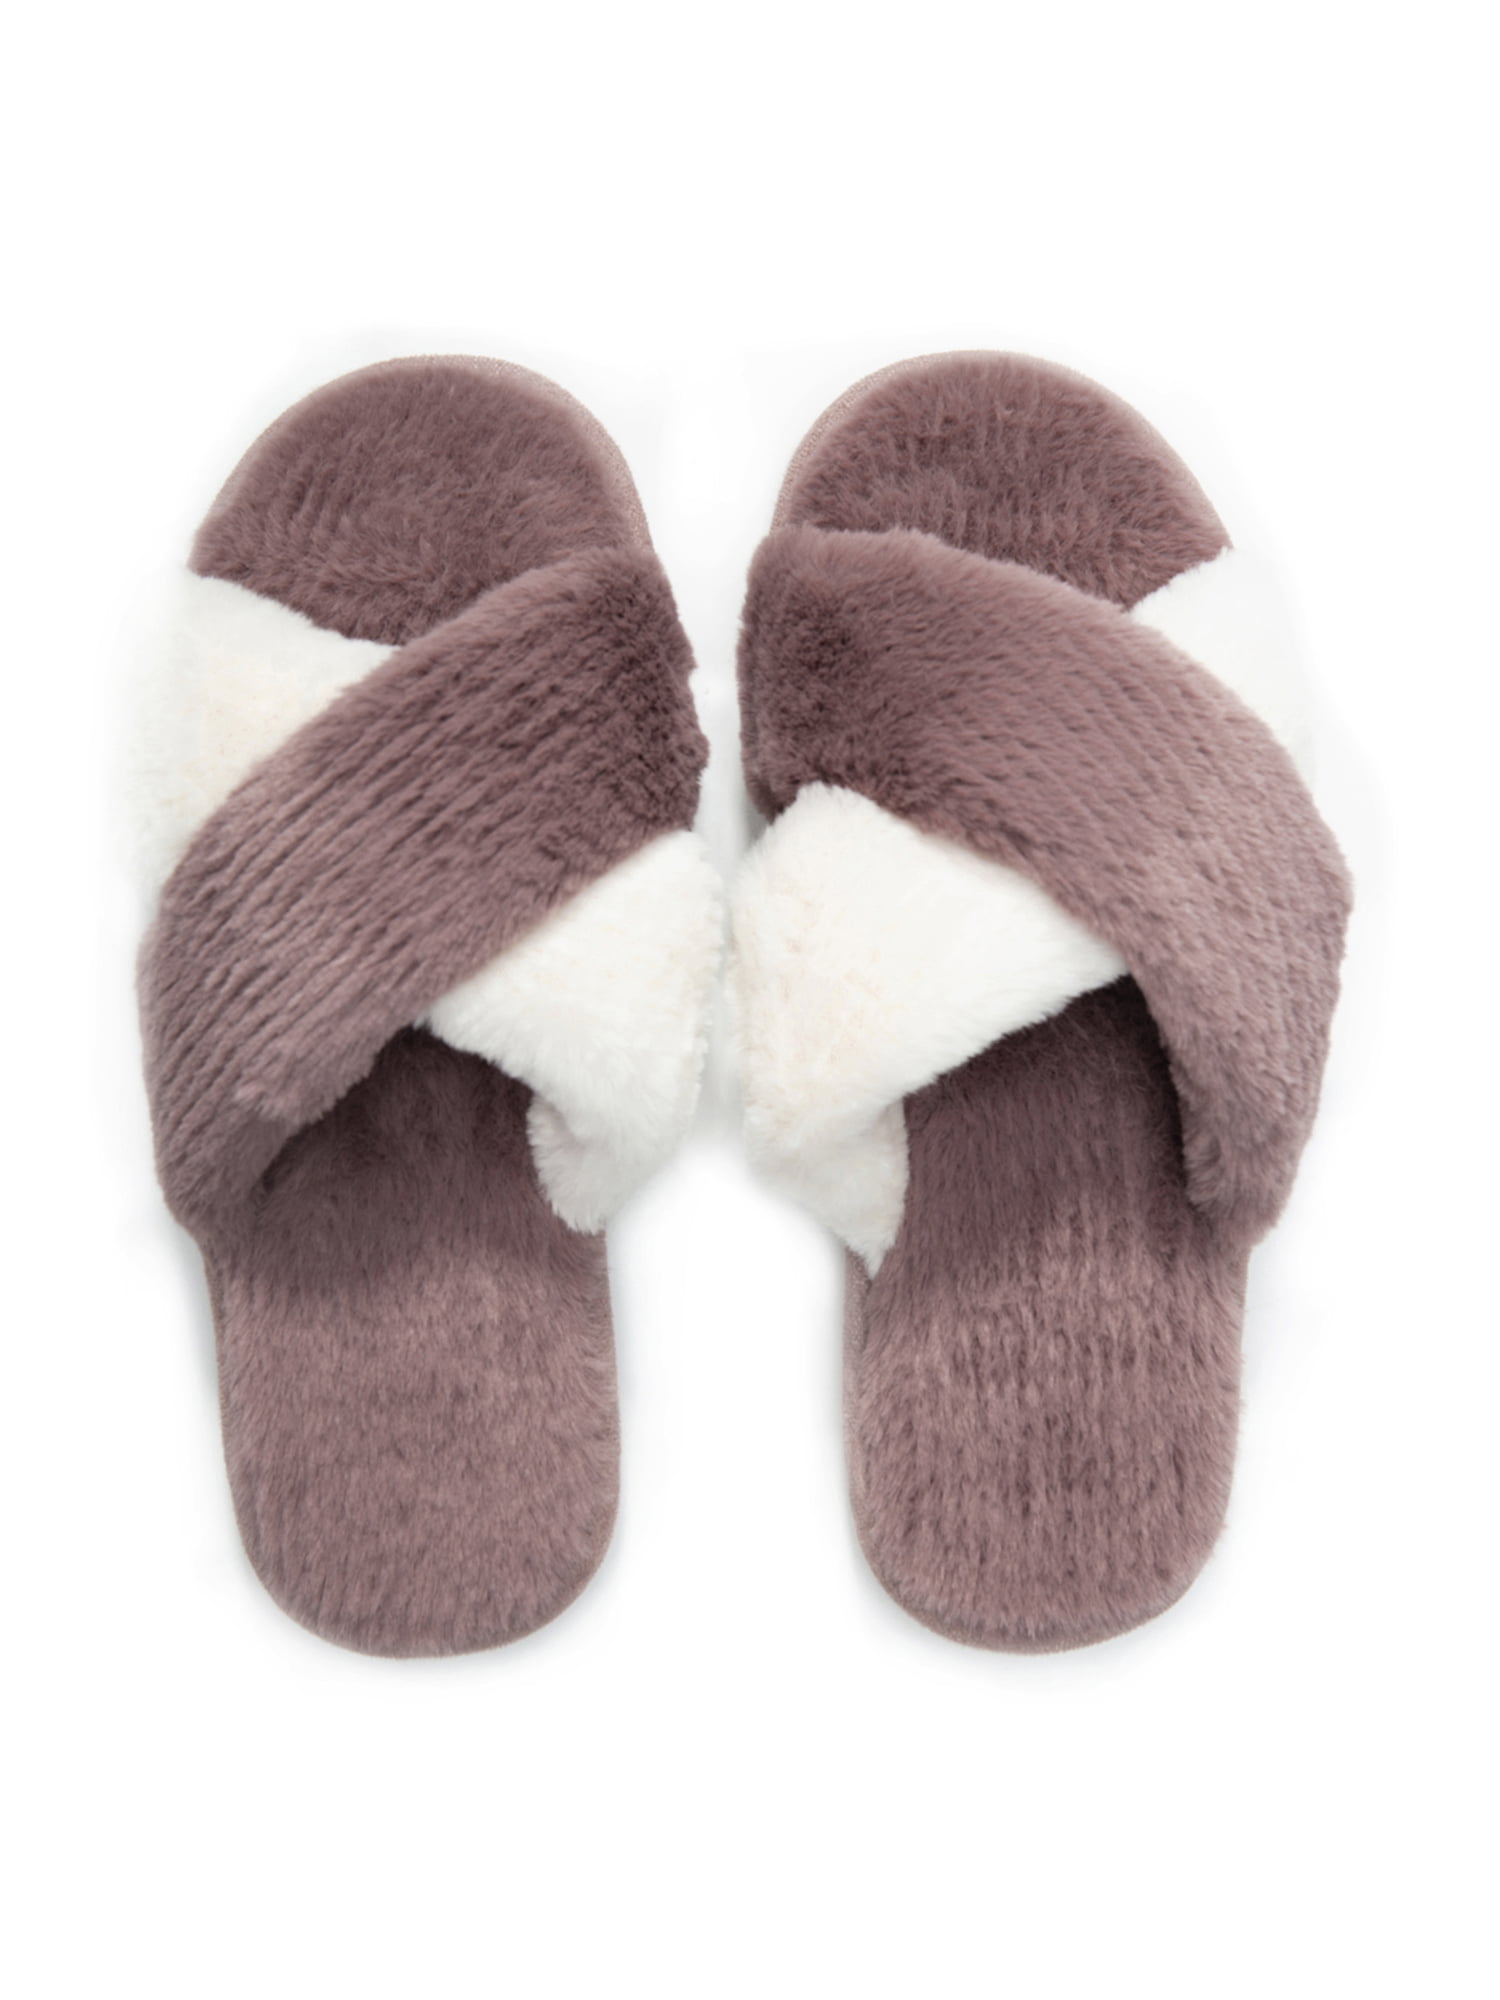 Mabove Womens Slippers Ladies Fluffy Sliders Cosy Faux Fur Slippers Open Toes Warm Slippers for Indoor Winter